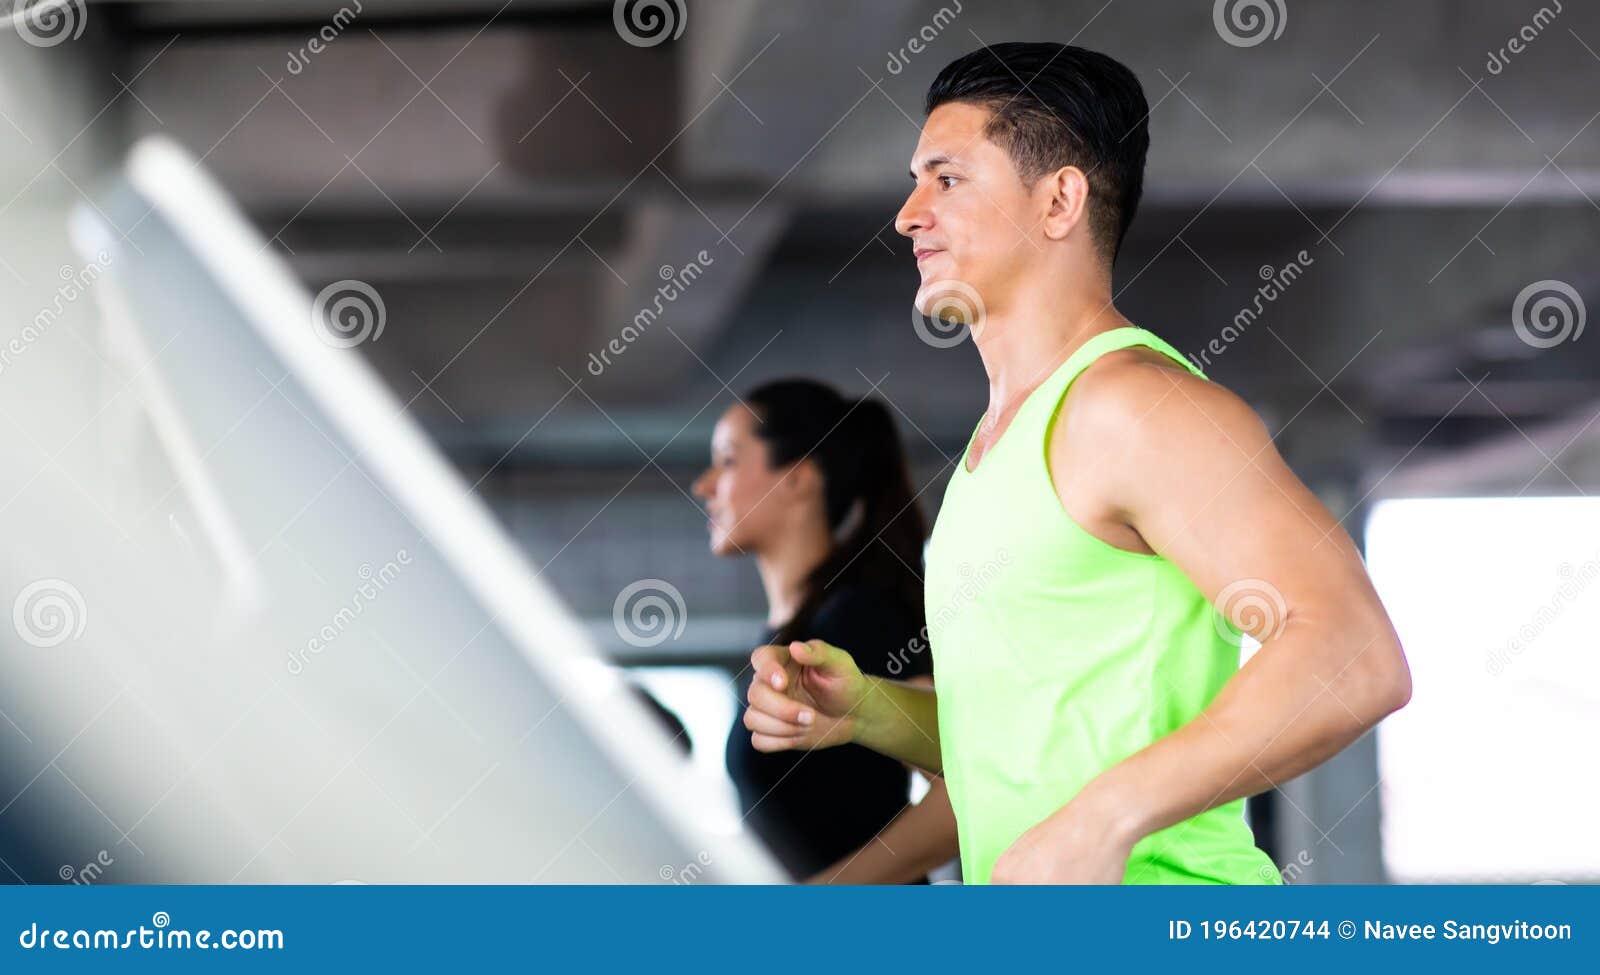 man running on treadmill  machine at gym sports club. fitness healthy lifestye and workout at gym concept